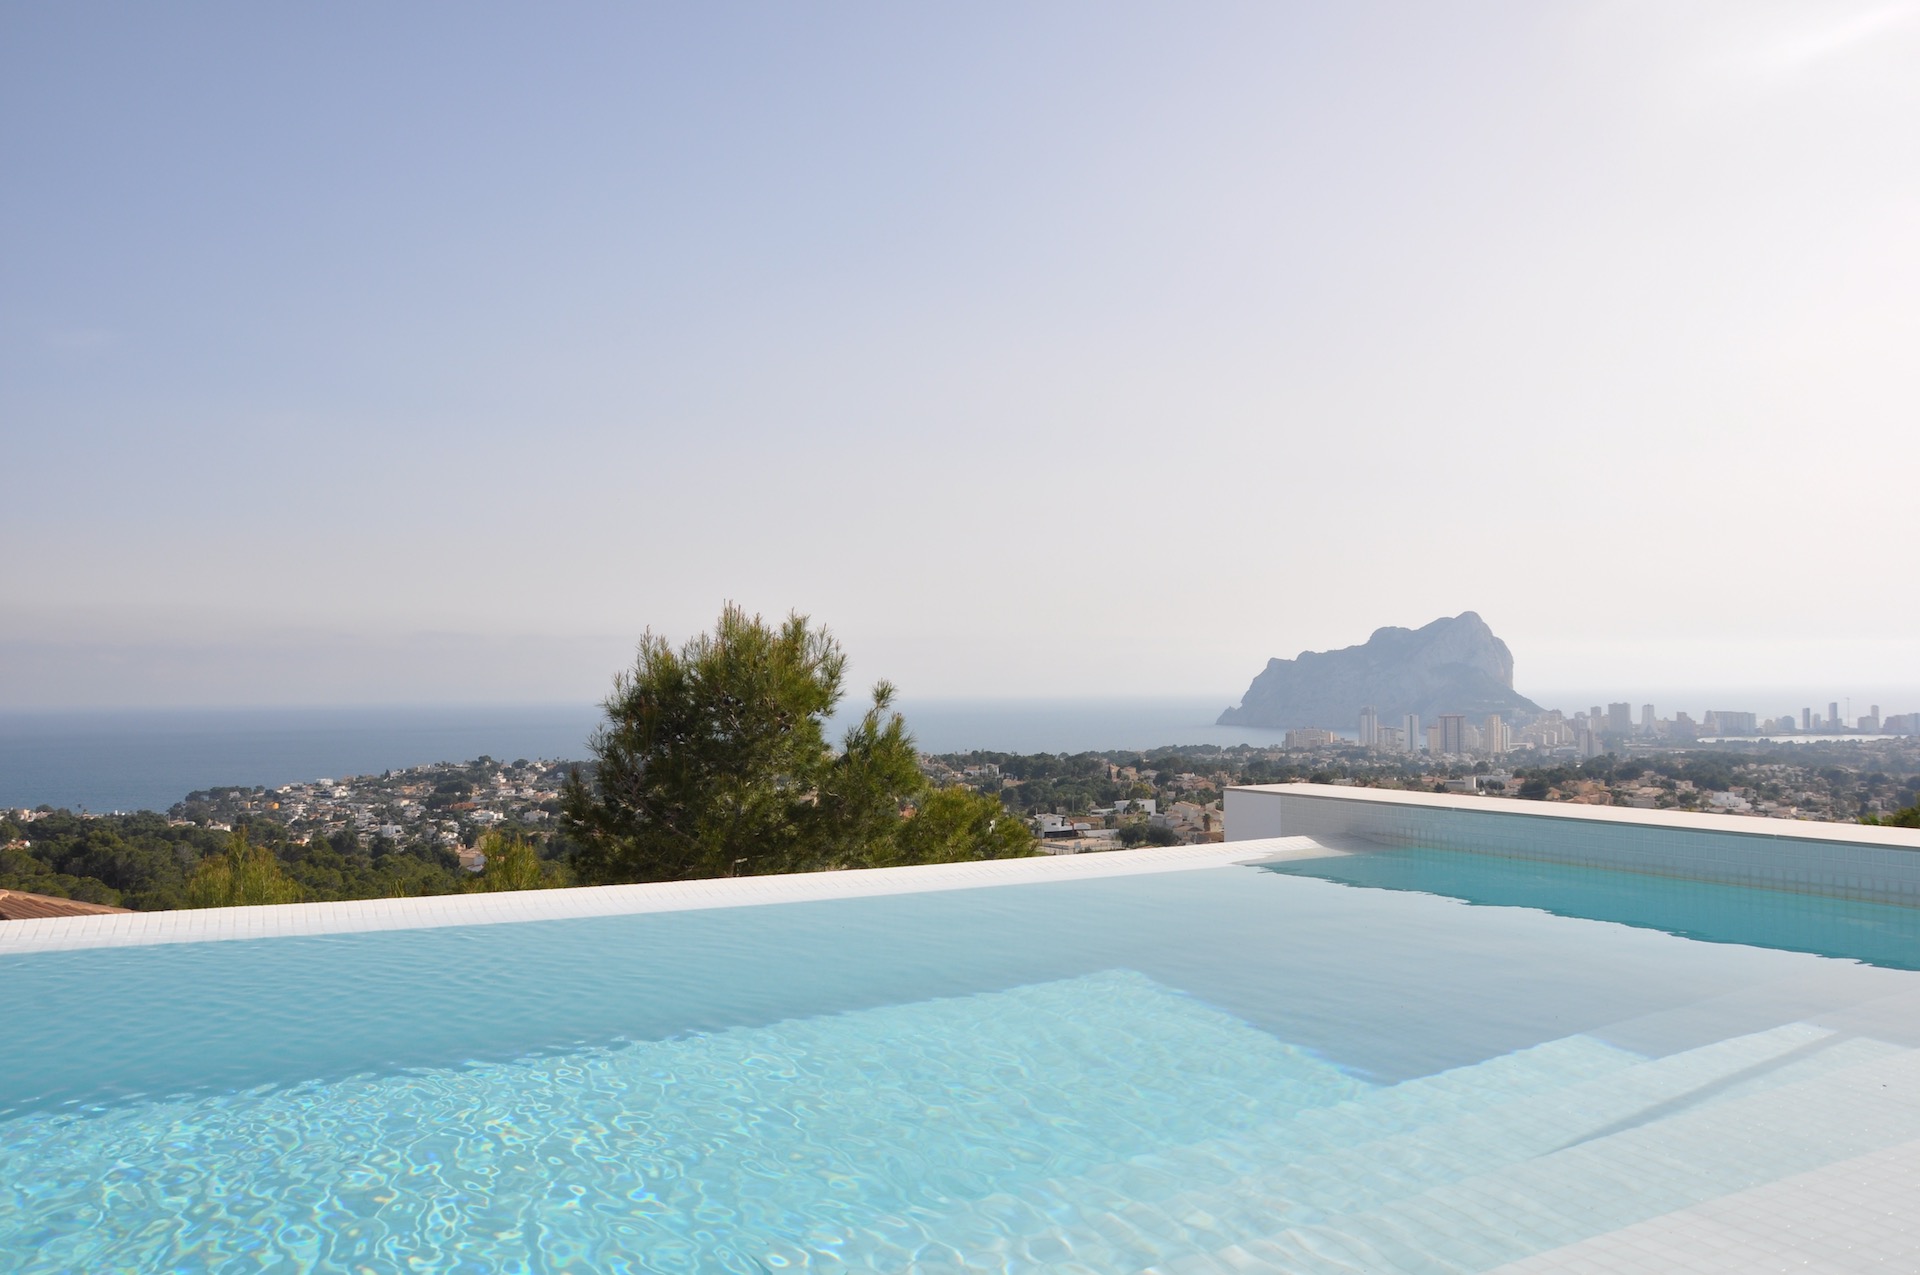 Fotogallerij - 9 - Exceptional homes in the Costa Blanca. Unparalleled Service. Exceptional properties in the Costa Blanca